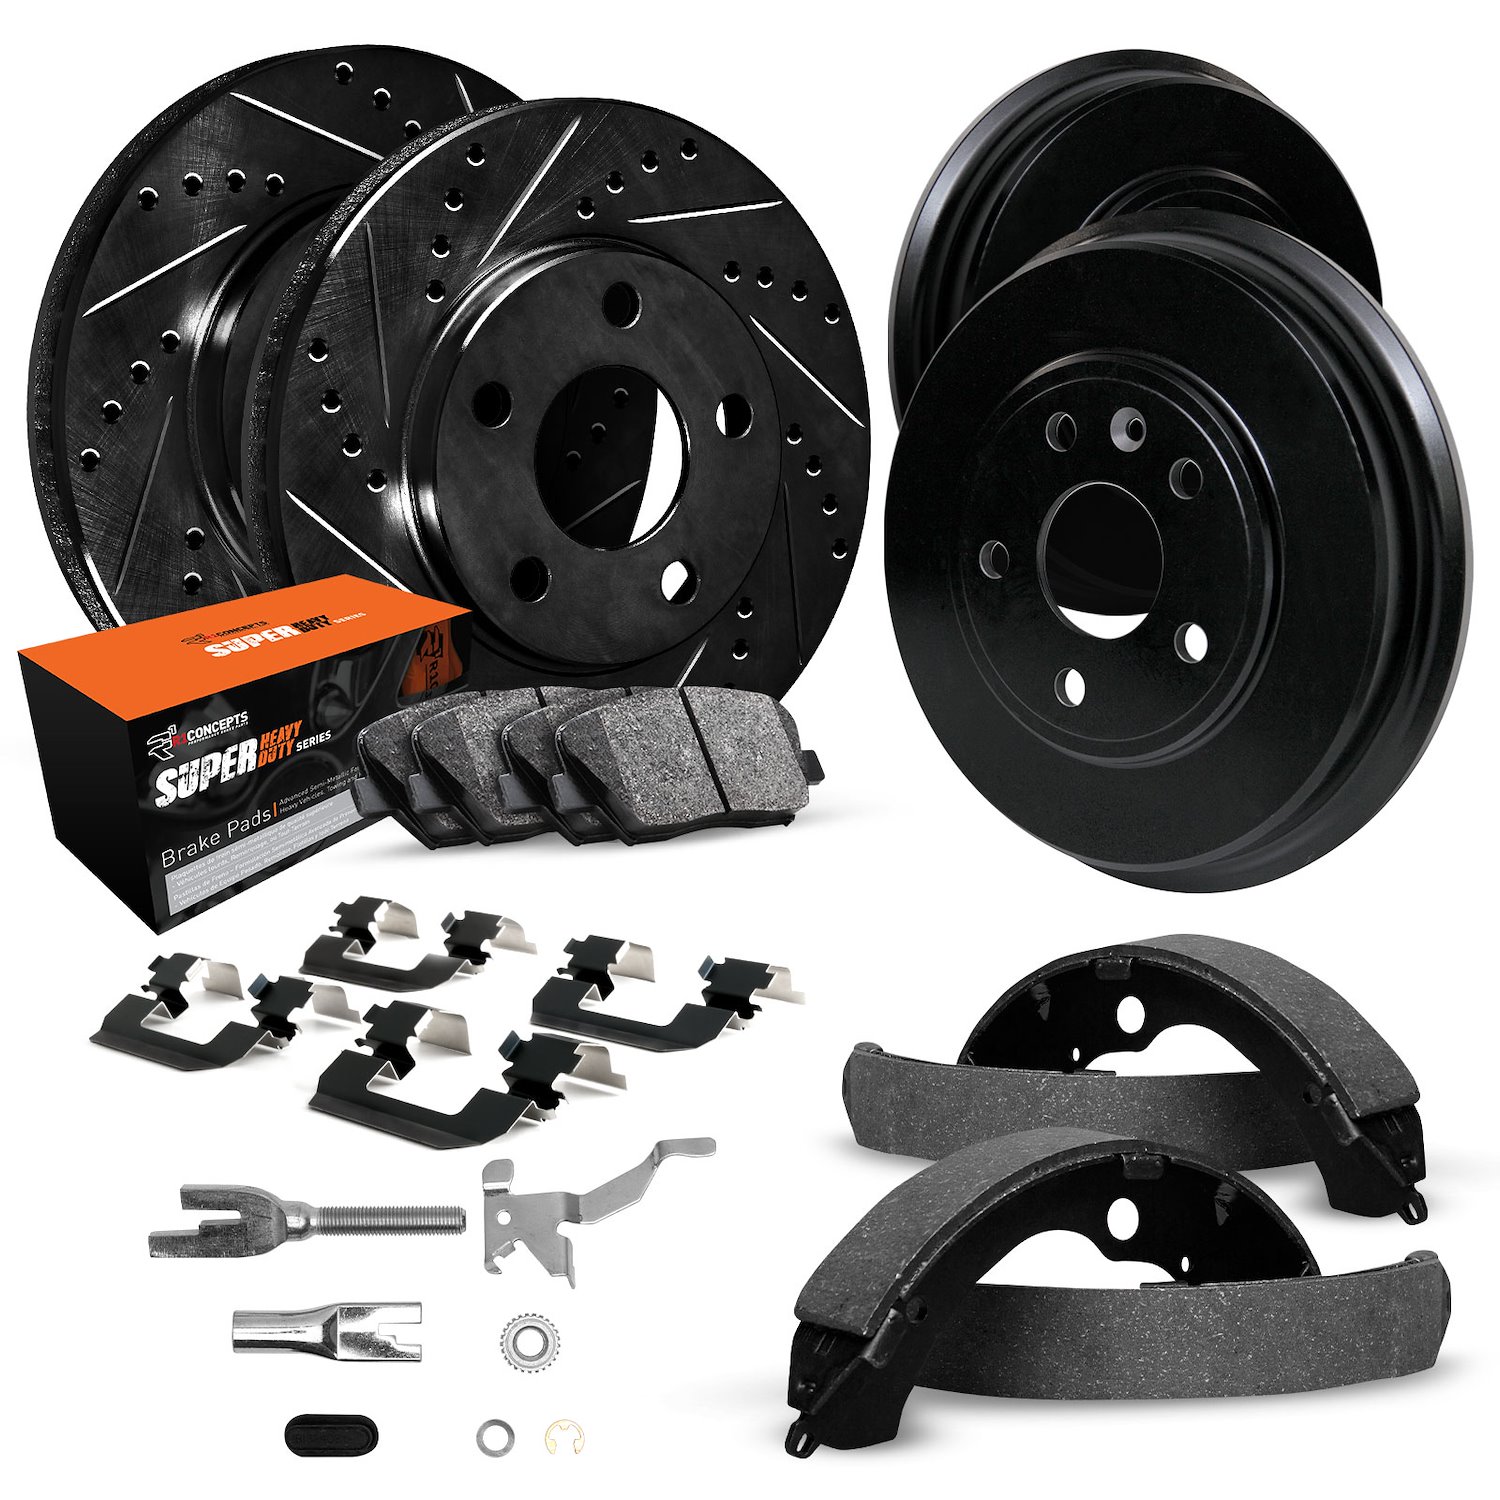 E-Line Drilled/Slotted Black Rotor & Drum Set w/Super-Duty Pads, Shoes, Hardware/Adjusters, 1993-1995 GM